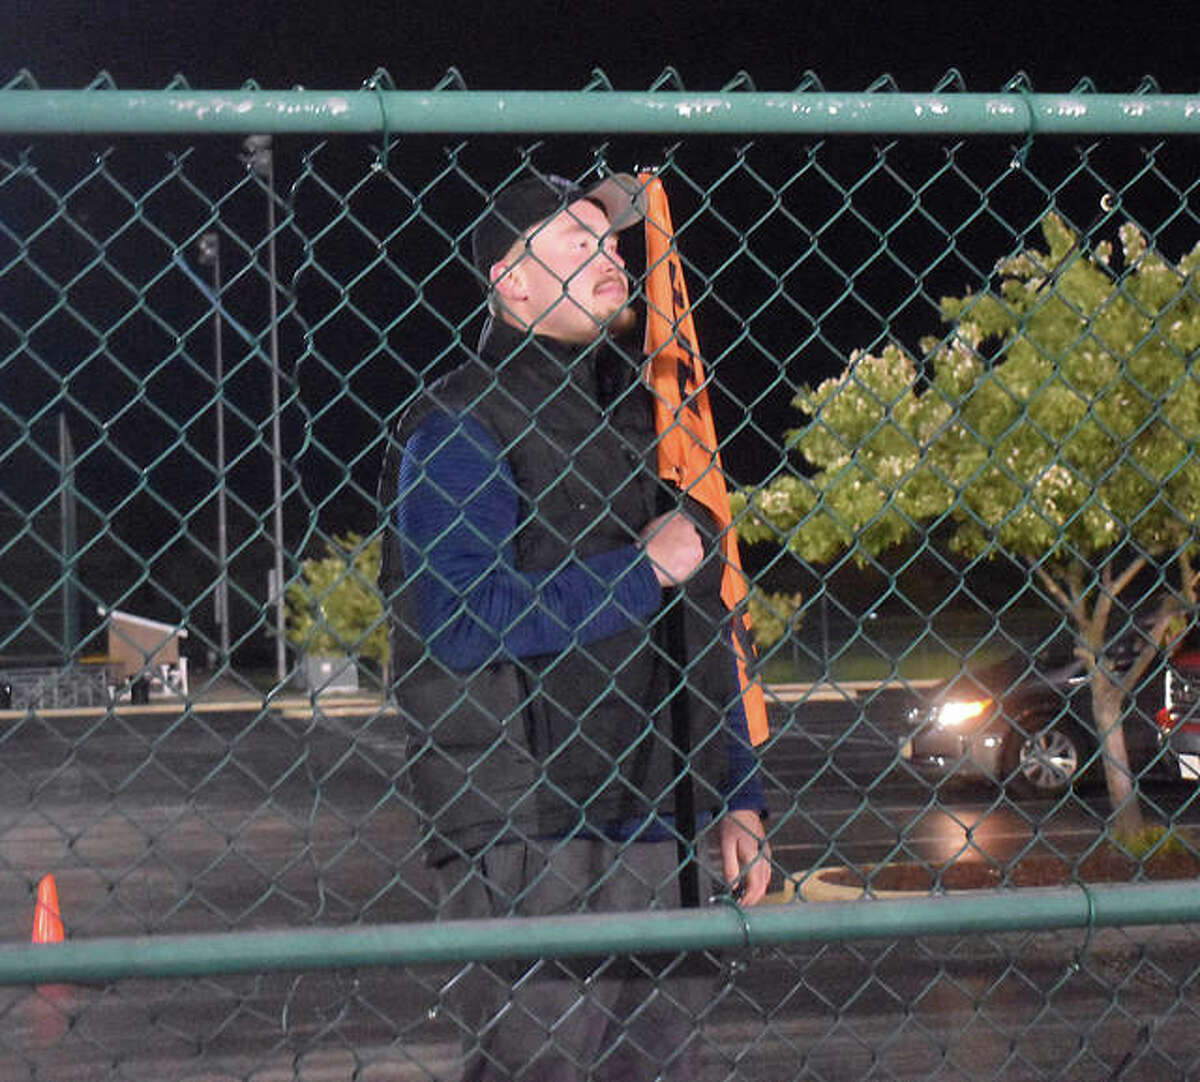 Edwardsville senior Jacob Kitchen looks at the football field from behind the gate in the parking lot Friday. Reames would have been in the middle of his baseball season. The District 7 Sports Complex was lit up Friday night in honor of the senior class. At 8:20 p.m. (20:20 military time), the lights were turned on for 20 minutes in honor of the seniors, who will end their prep days at home with schools being closed for the remainder of the academic year. A handful of seniors watched from the parking lot a safe distance away from each other. The other Southwestern Conference school, along with many throughout the state, took part in the event.